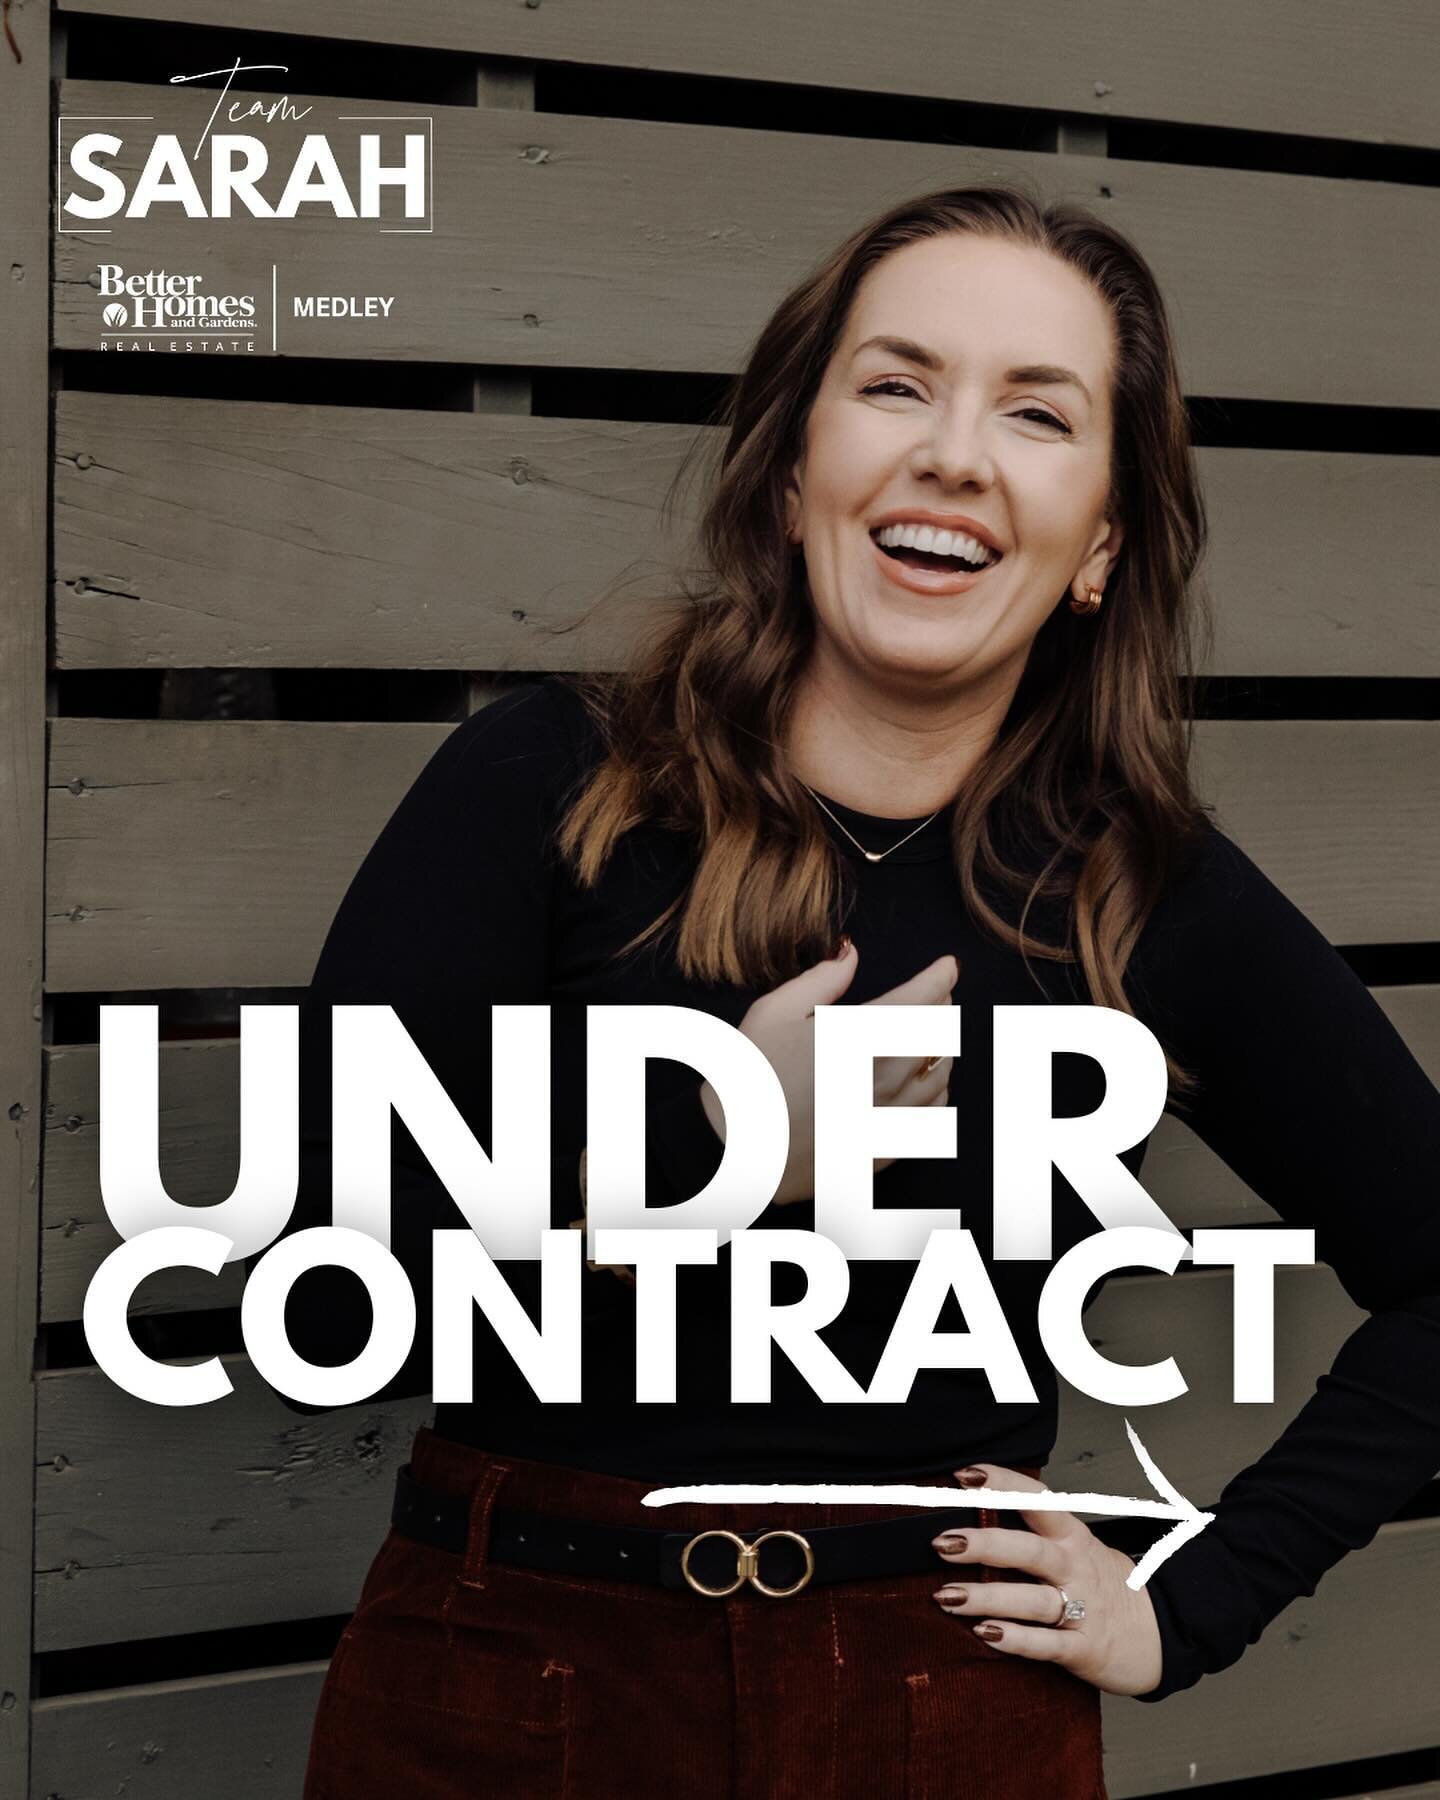 The spring market is here! ☀️🌸 After 8 offers and agents blowing up my phone for two days straight 😅, this home on 6 acres in West Columbia is under contract!

Sarah Bennett, REALTOR&reg;⁣⁣
Owner, CEO, and Lead of Team Sarah
Better Homes and Garden